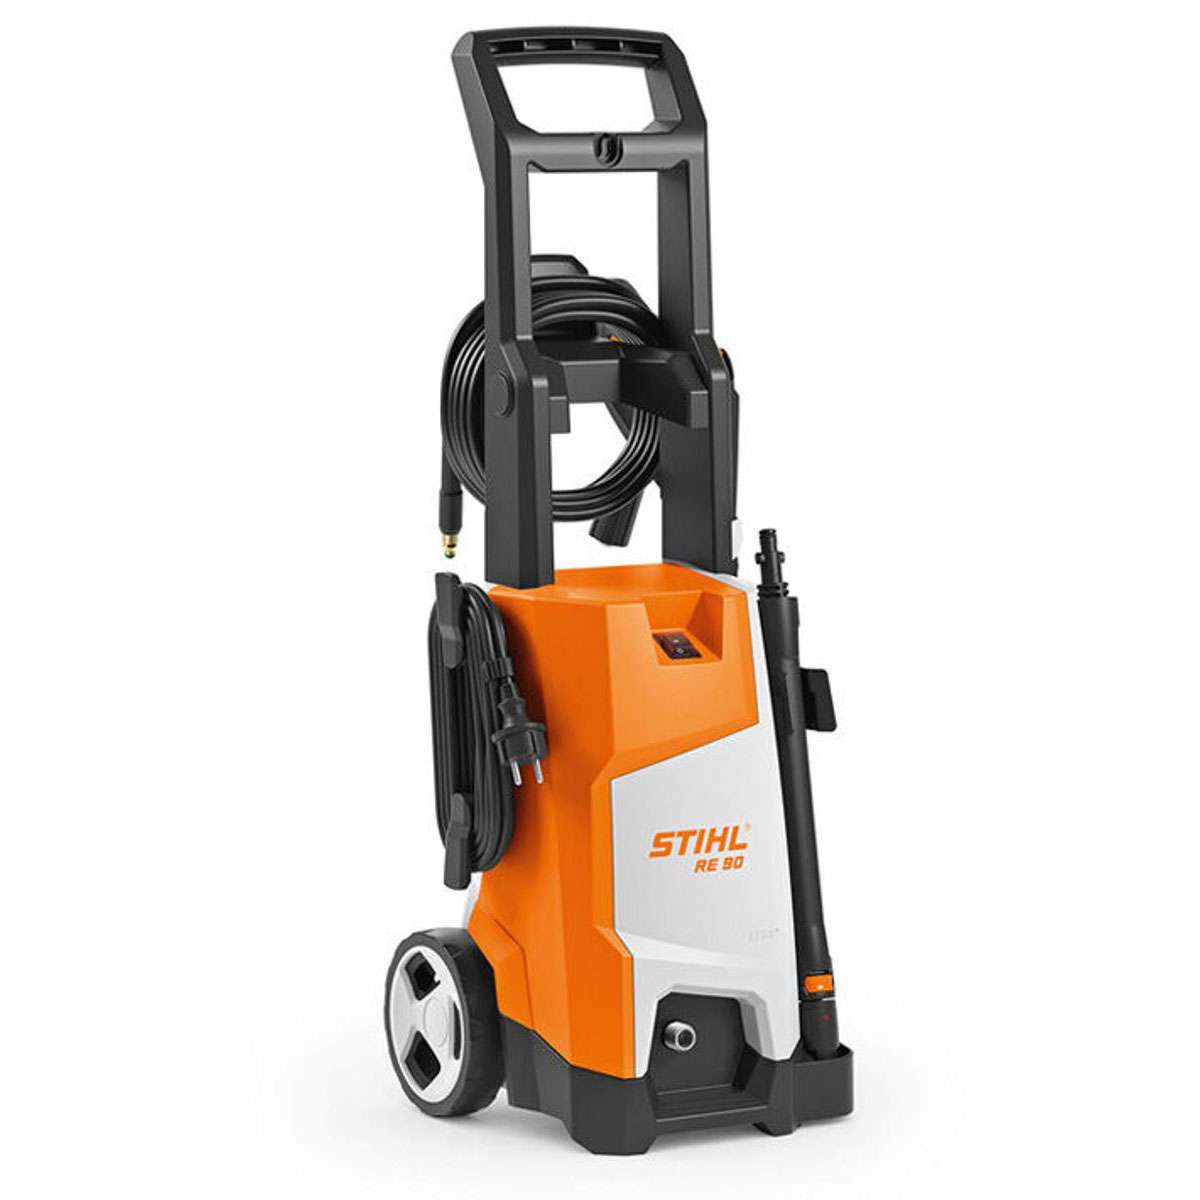 Stihl RE 90 Entry level high pressure cleaner 